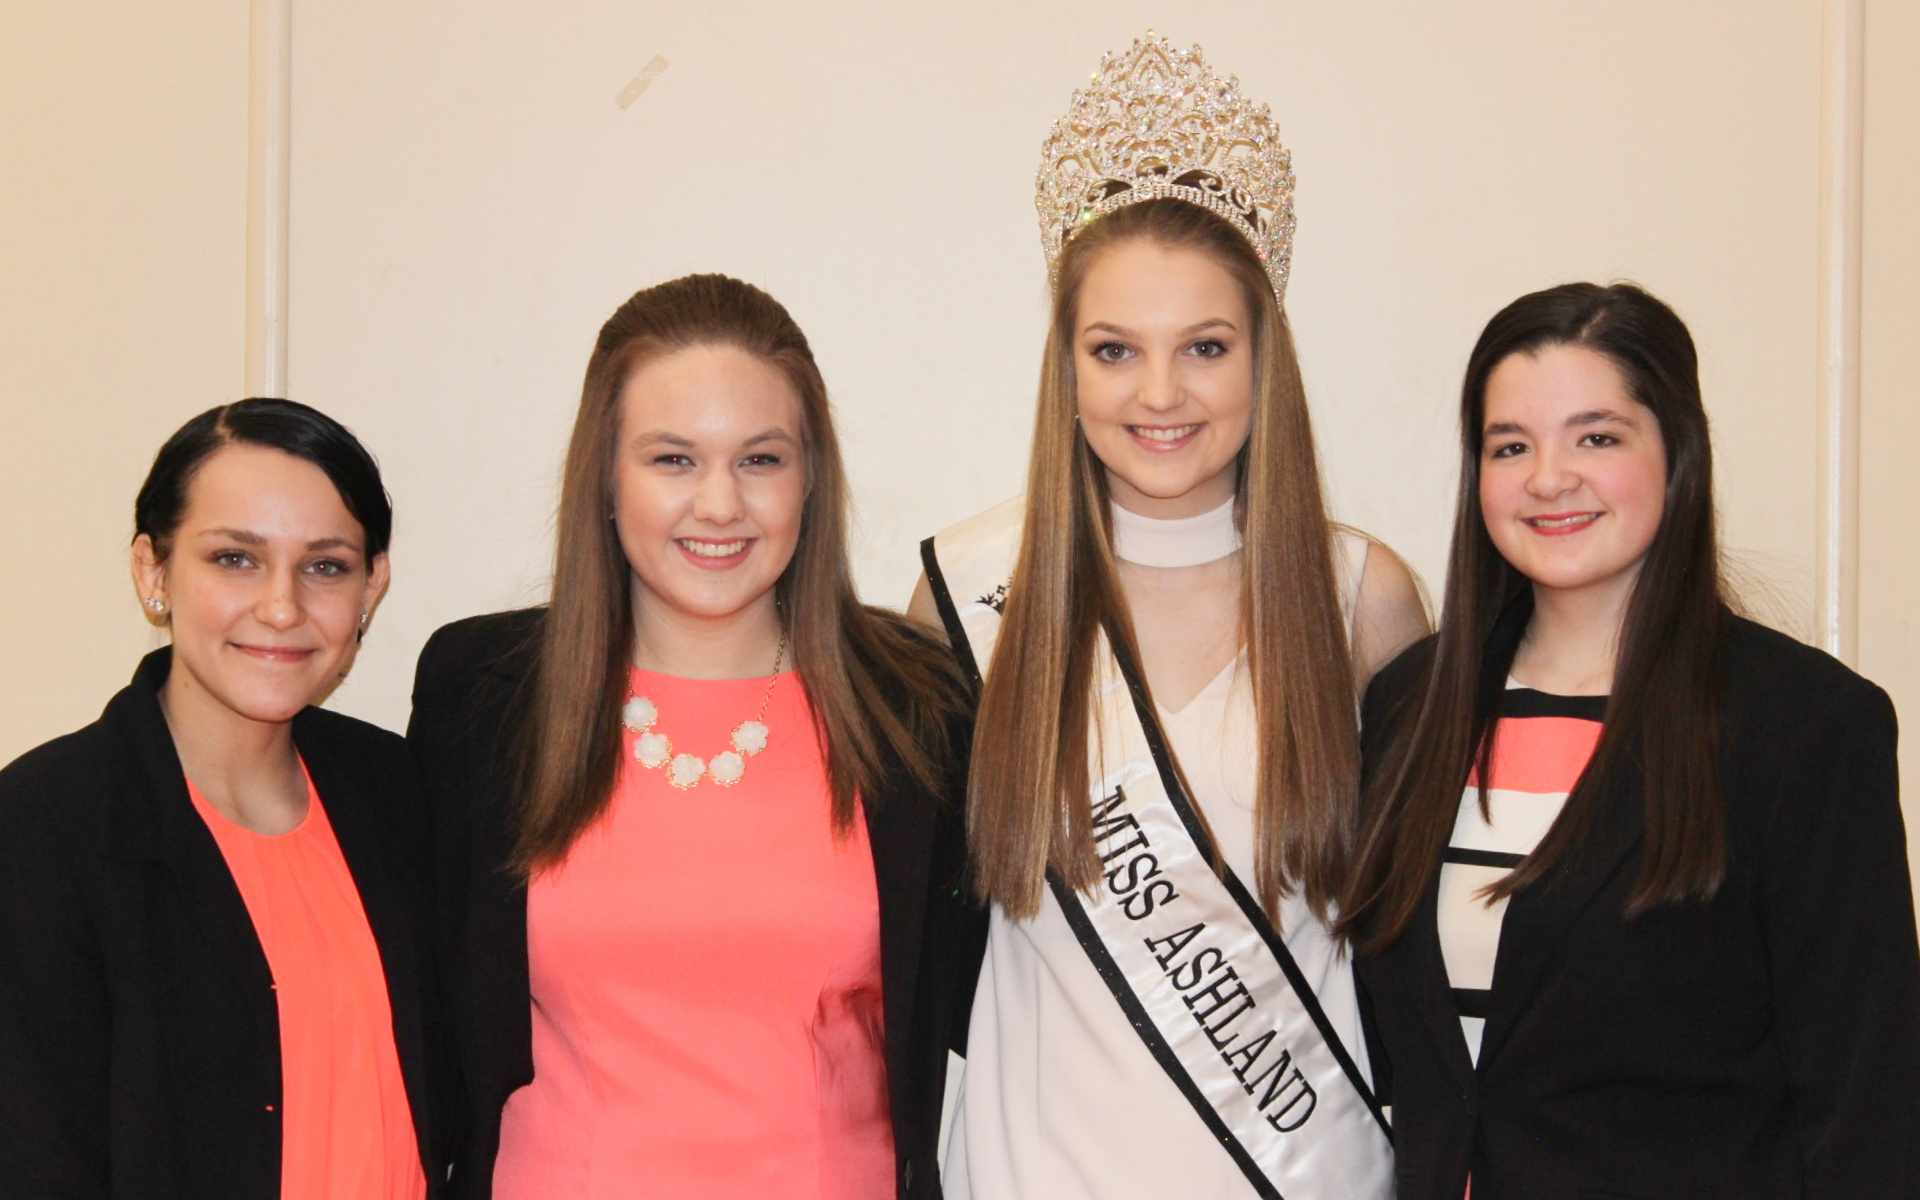 Eleven to vie for Ashland crowns - The County